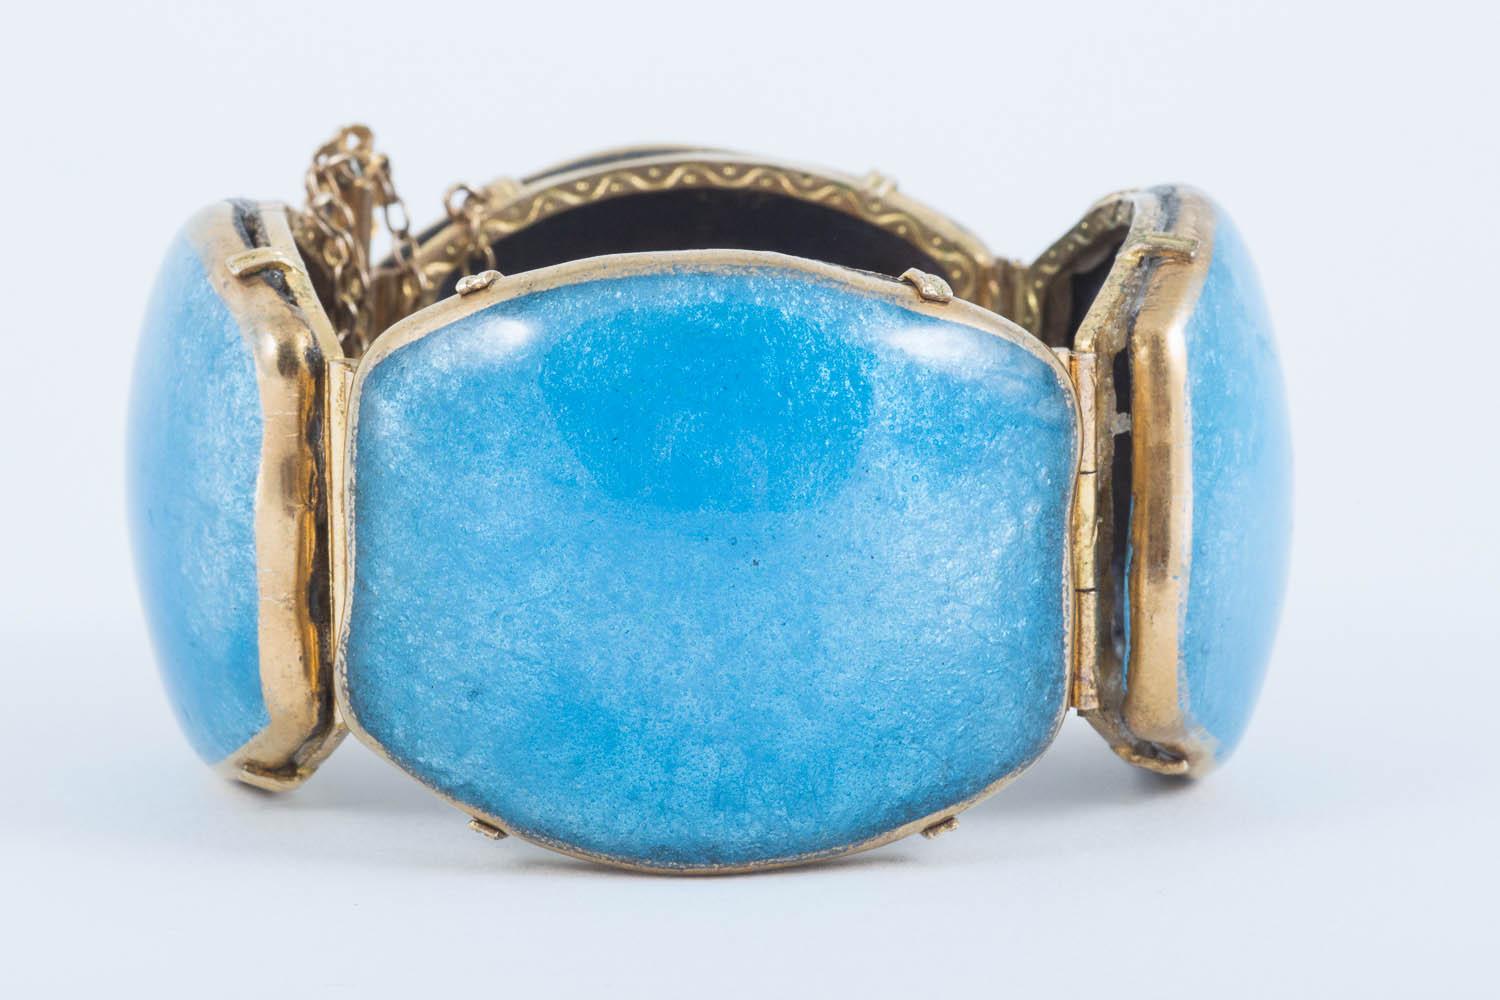 This incredible turquoise enamel cuff is signed Castel who designed decorative items and jewellery for Limoges in the 1940s. What makes this bracelet so special is the very large full panels of deep azure blue enamel, well mounted on slightly